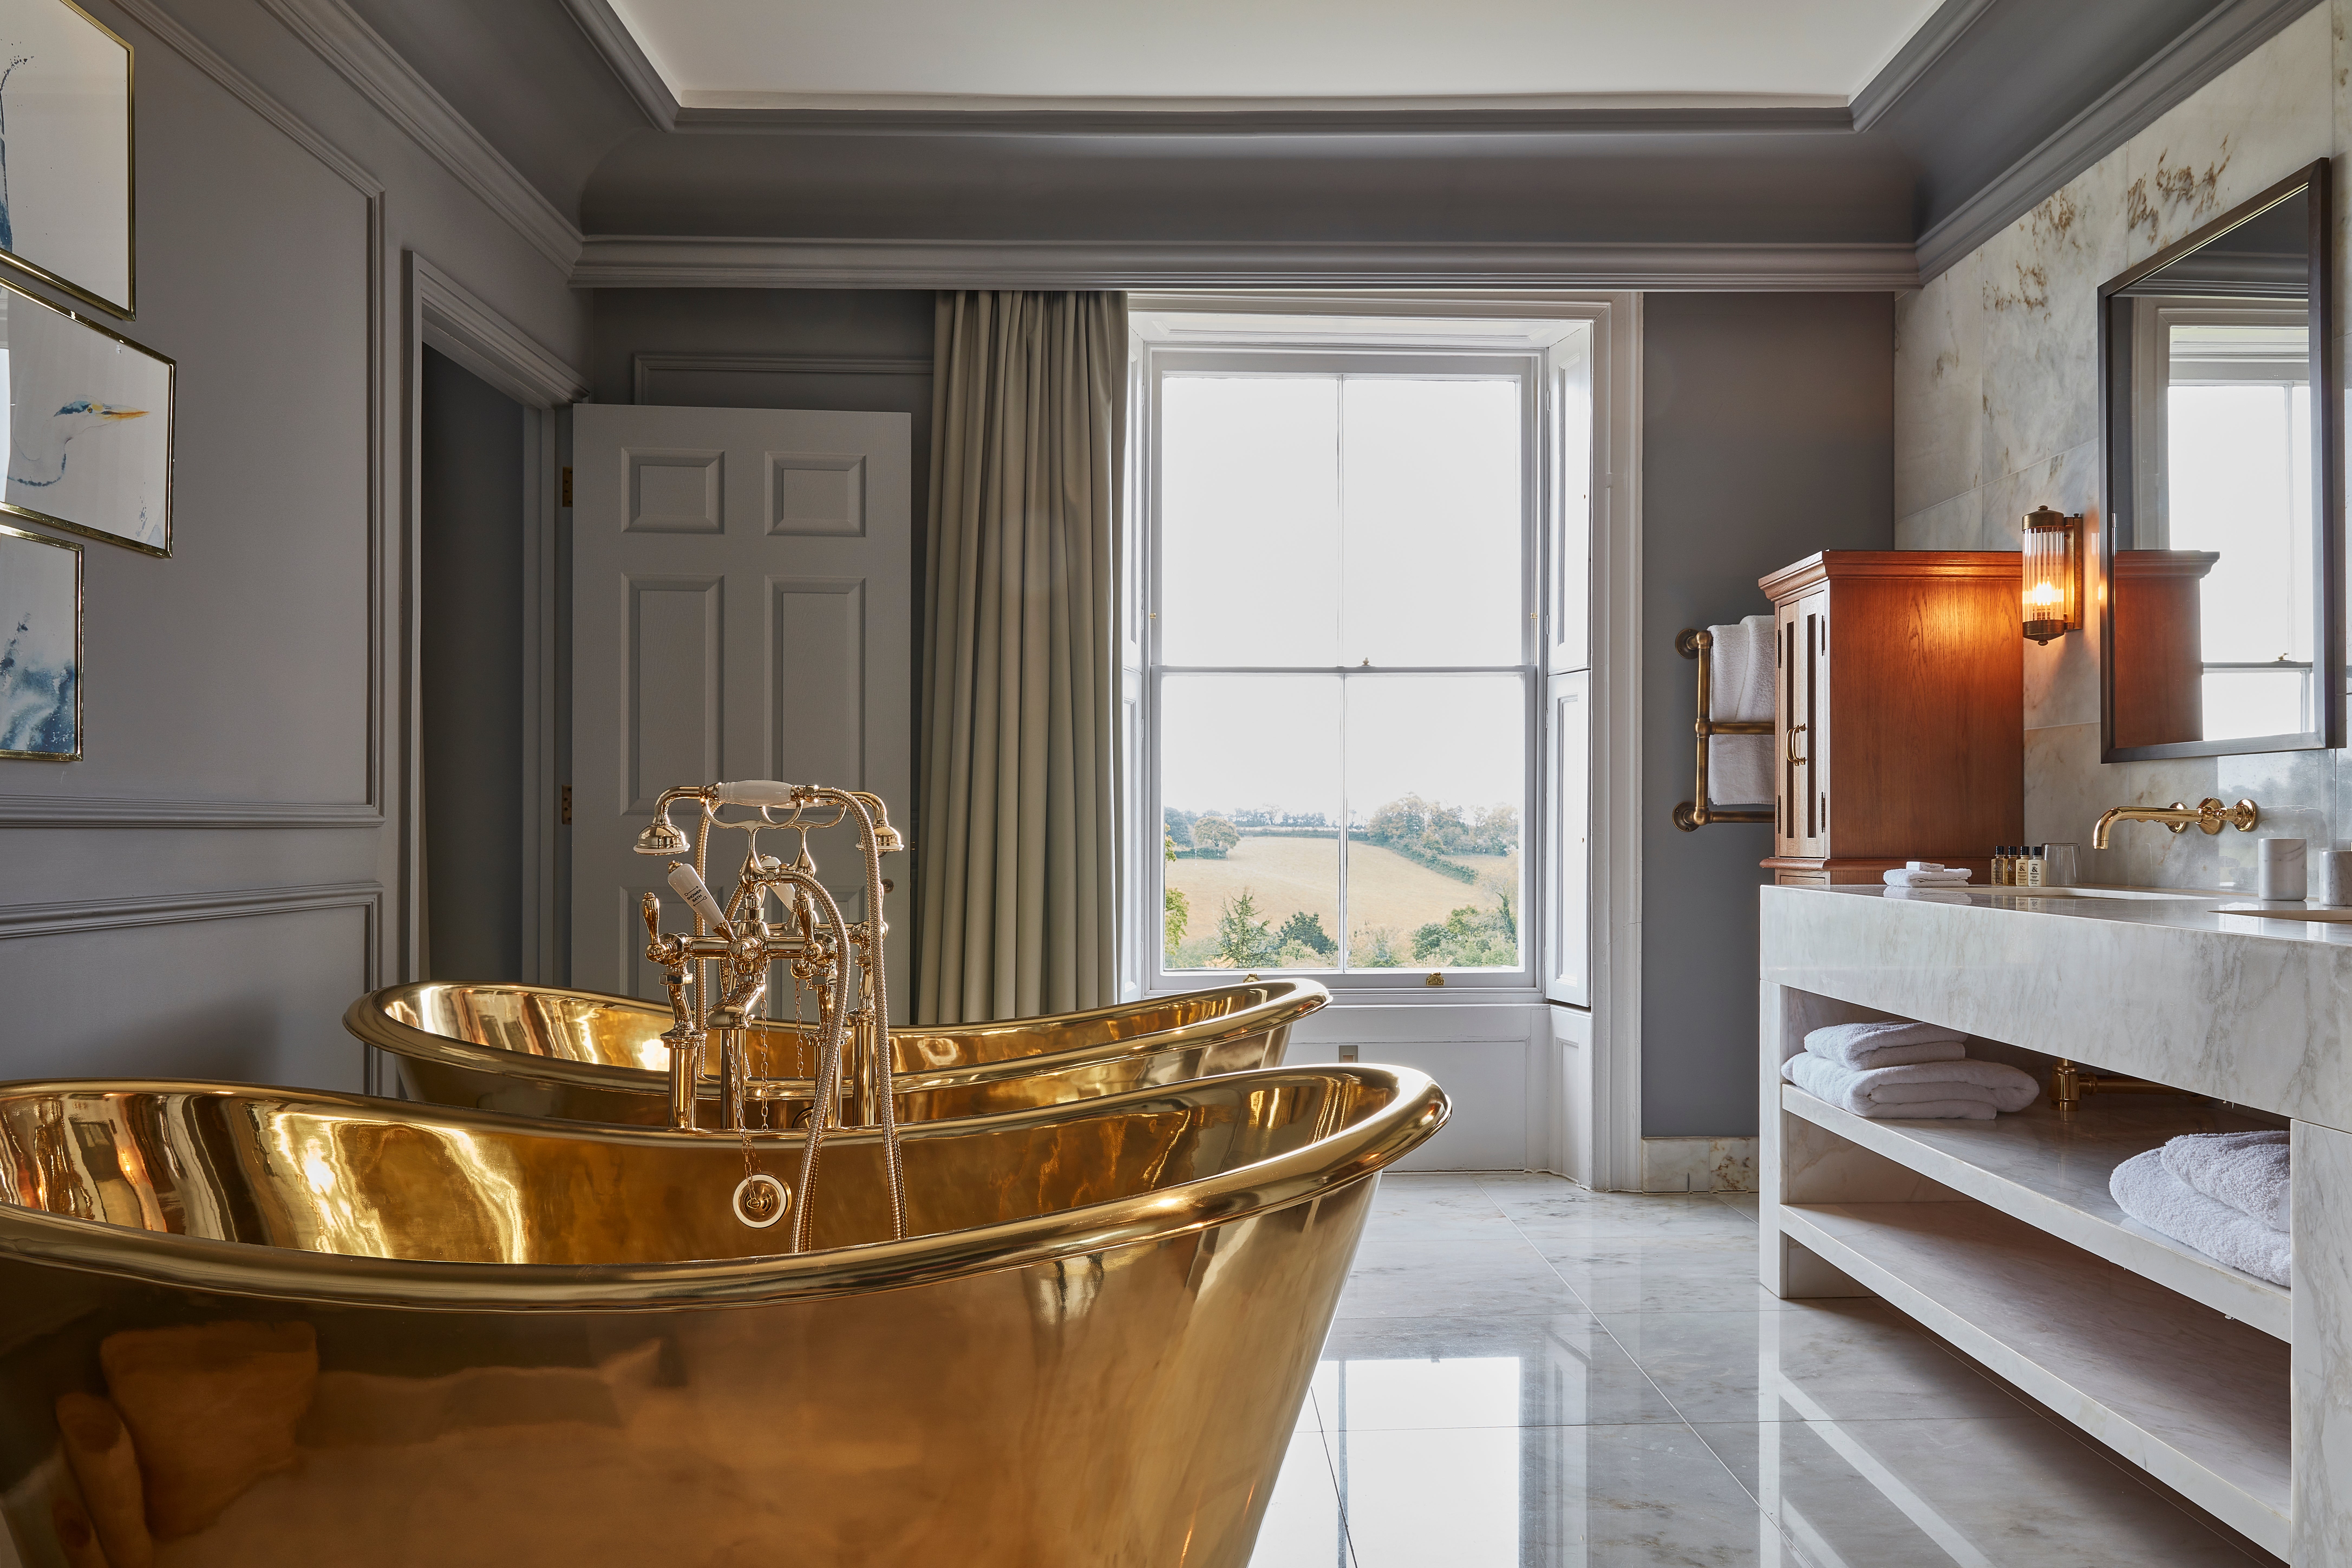 Lap up the luxury in one of Devon’s stylish stays